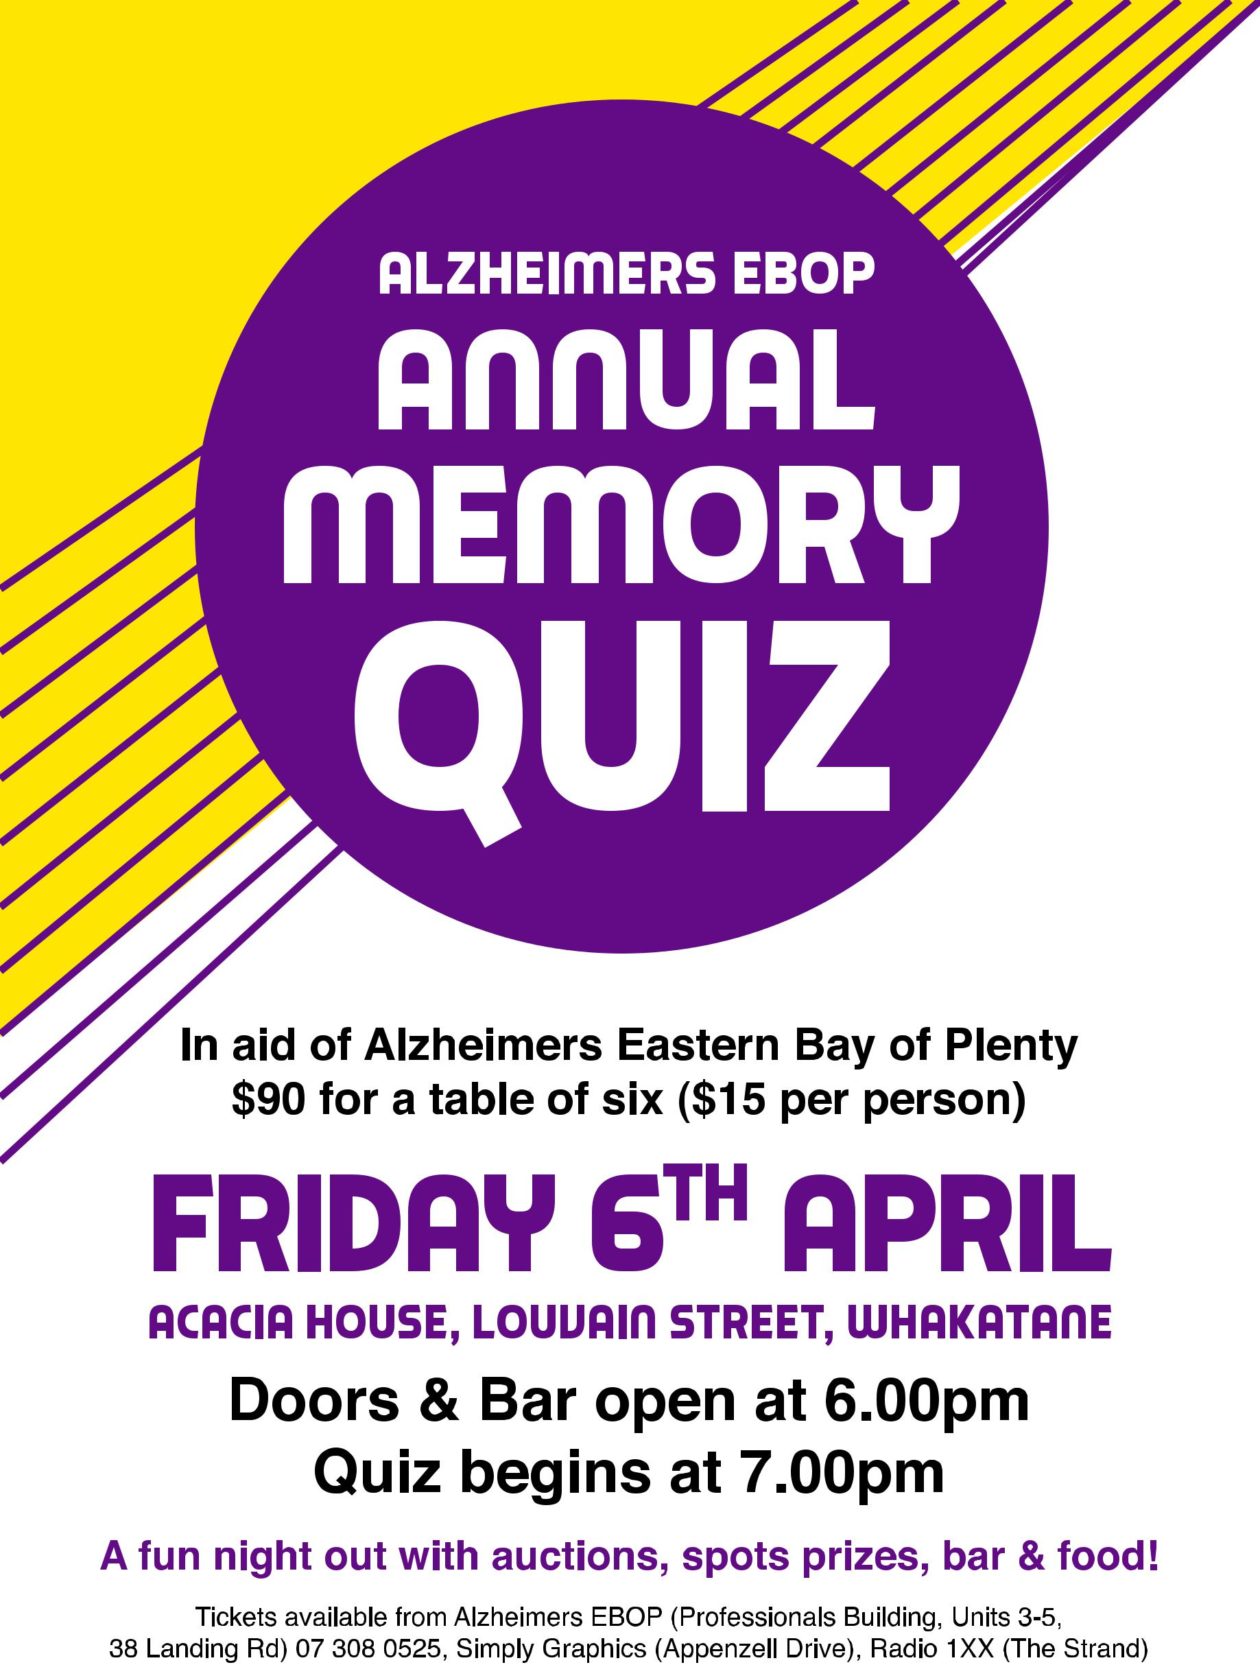 Alzheimers EBOP Annual Memory Quiz Post Cover Image